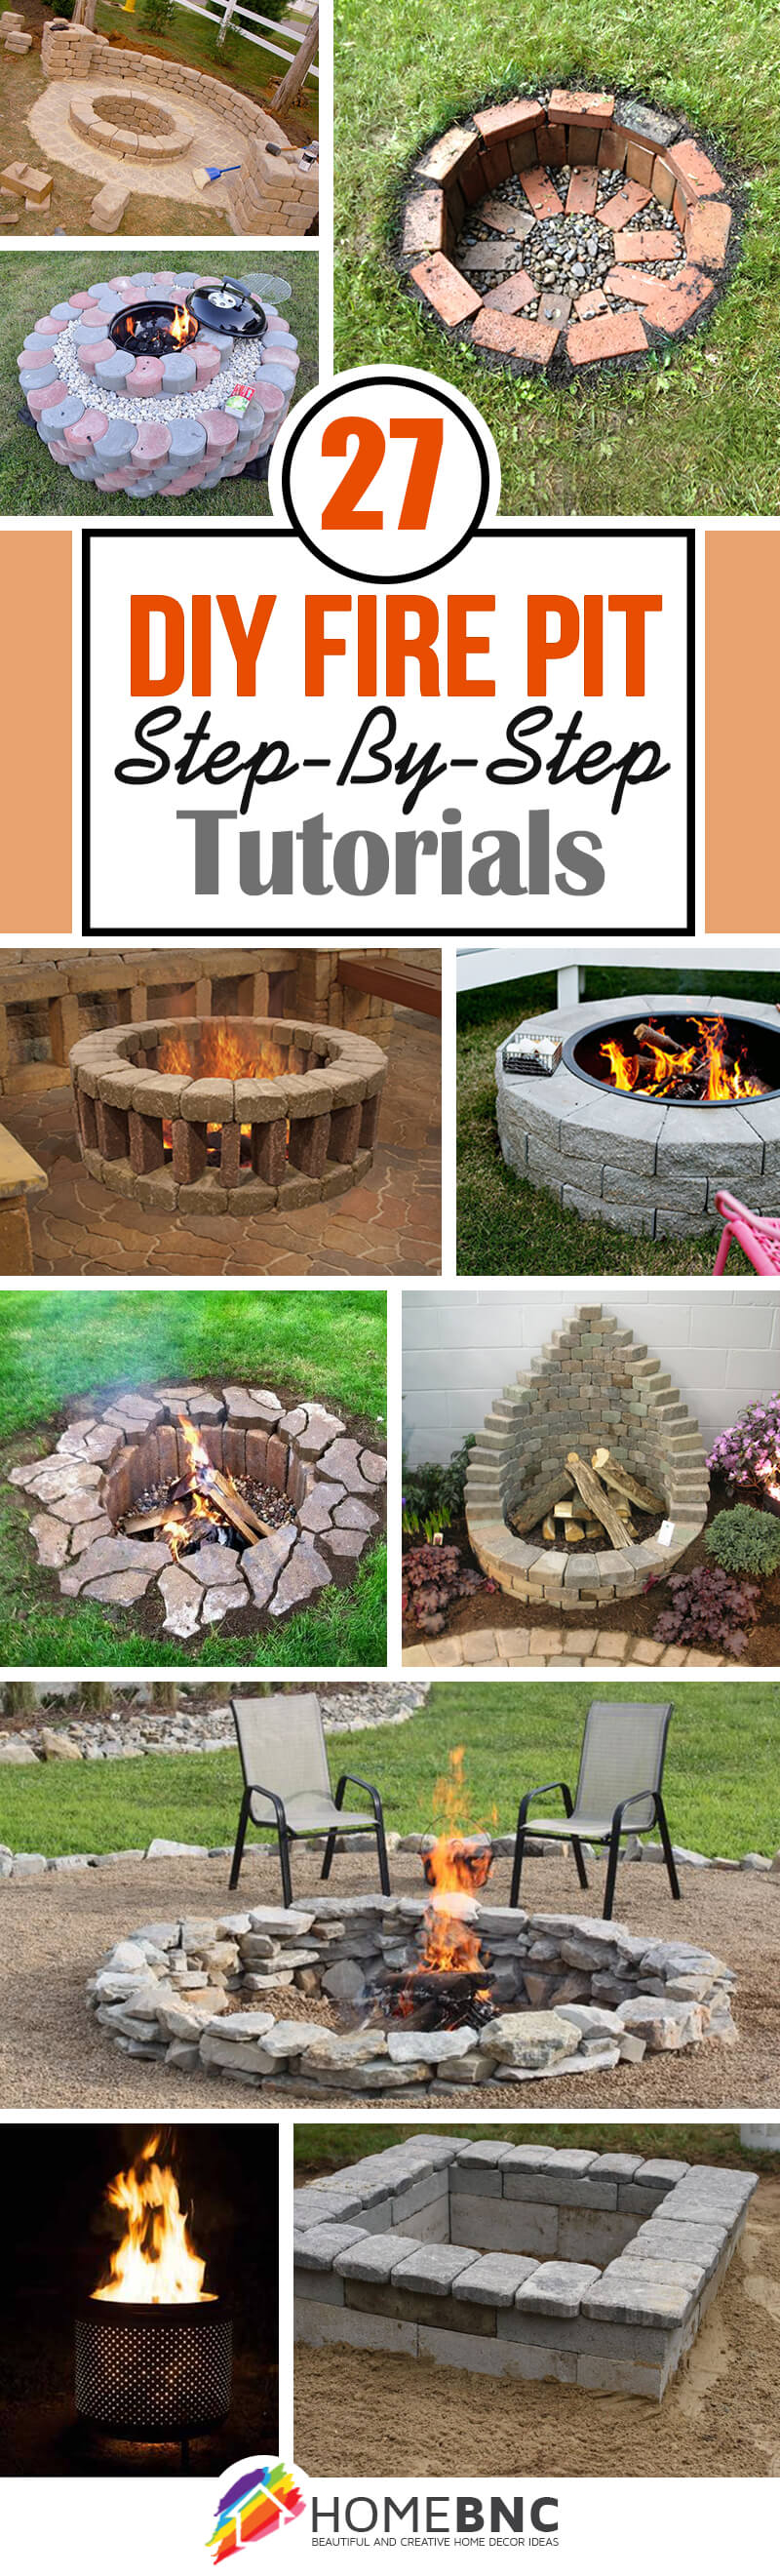 27 Best Diy Firepit Ideas And Designs, Small Backyard Ideas With Fire Pit